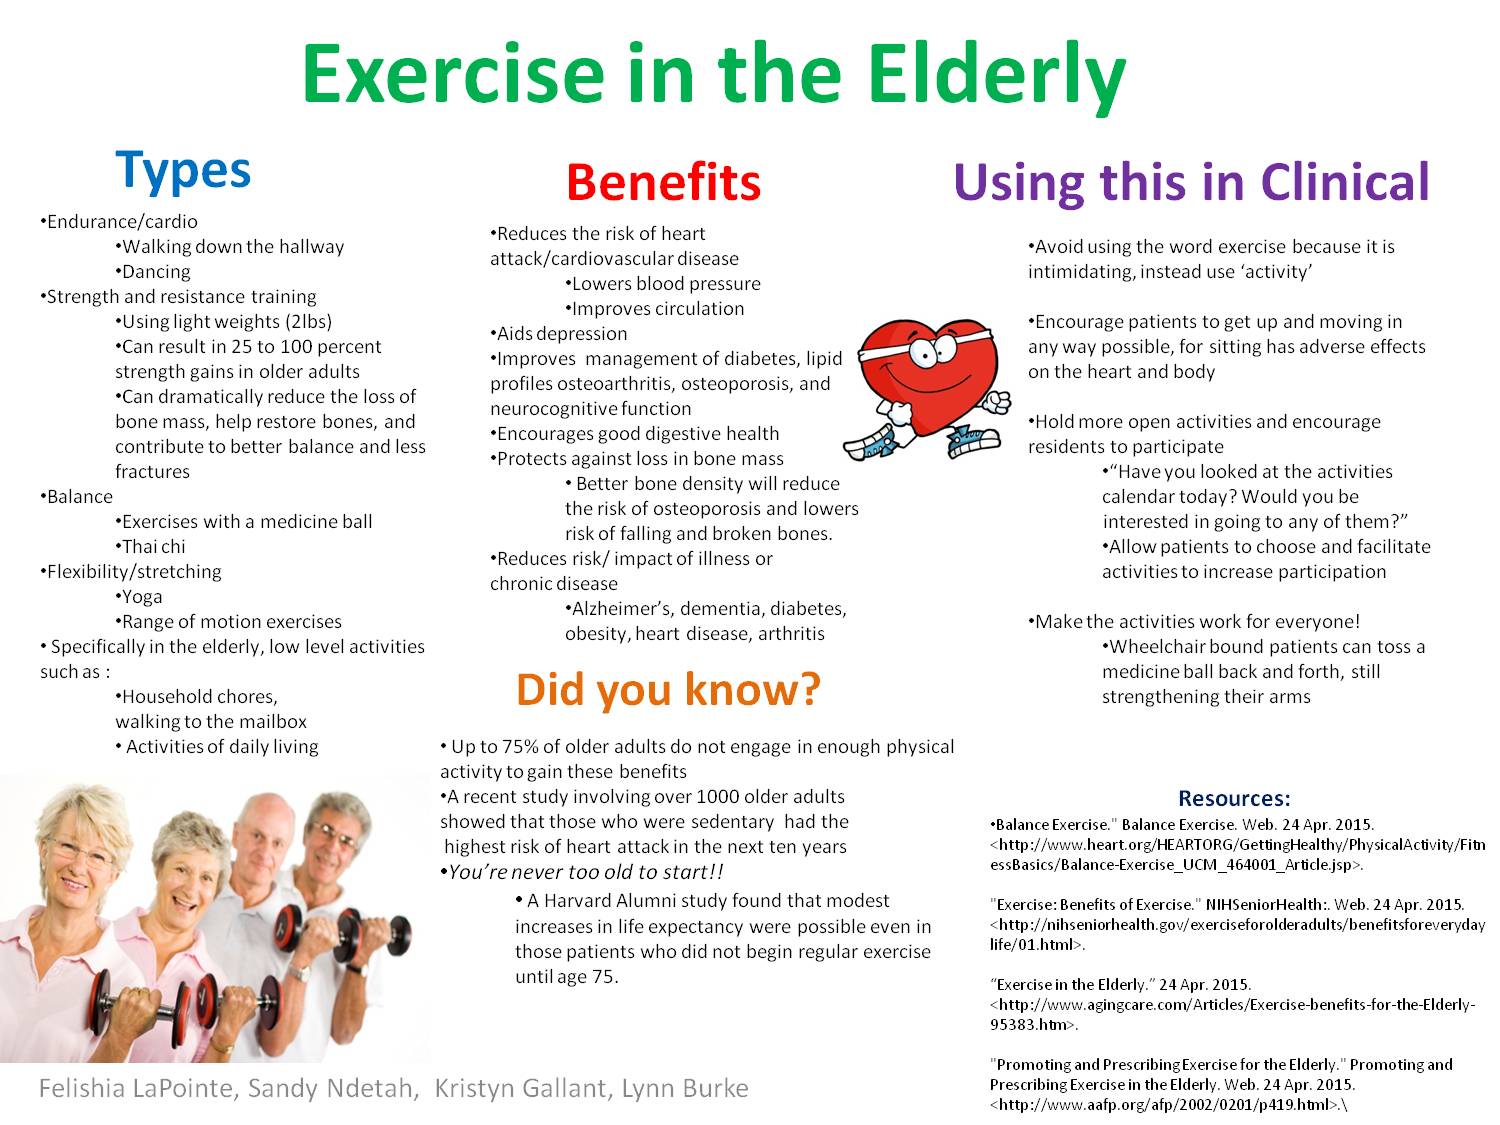 Exercise In The Elderly by fah8